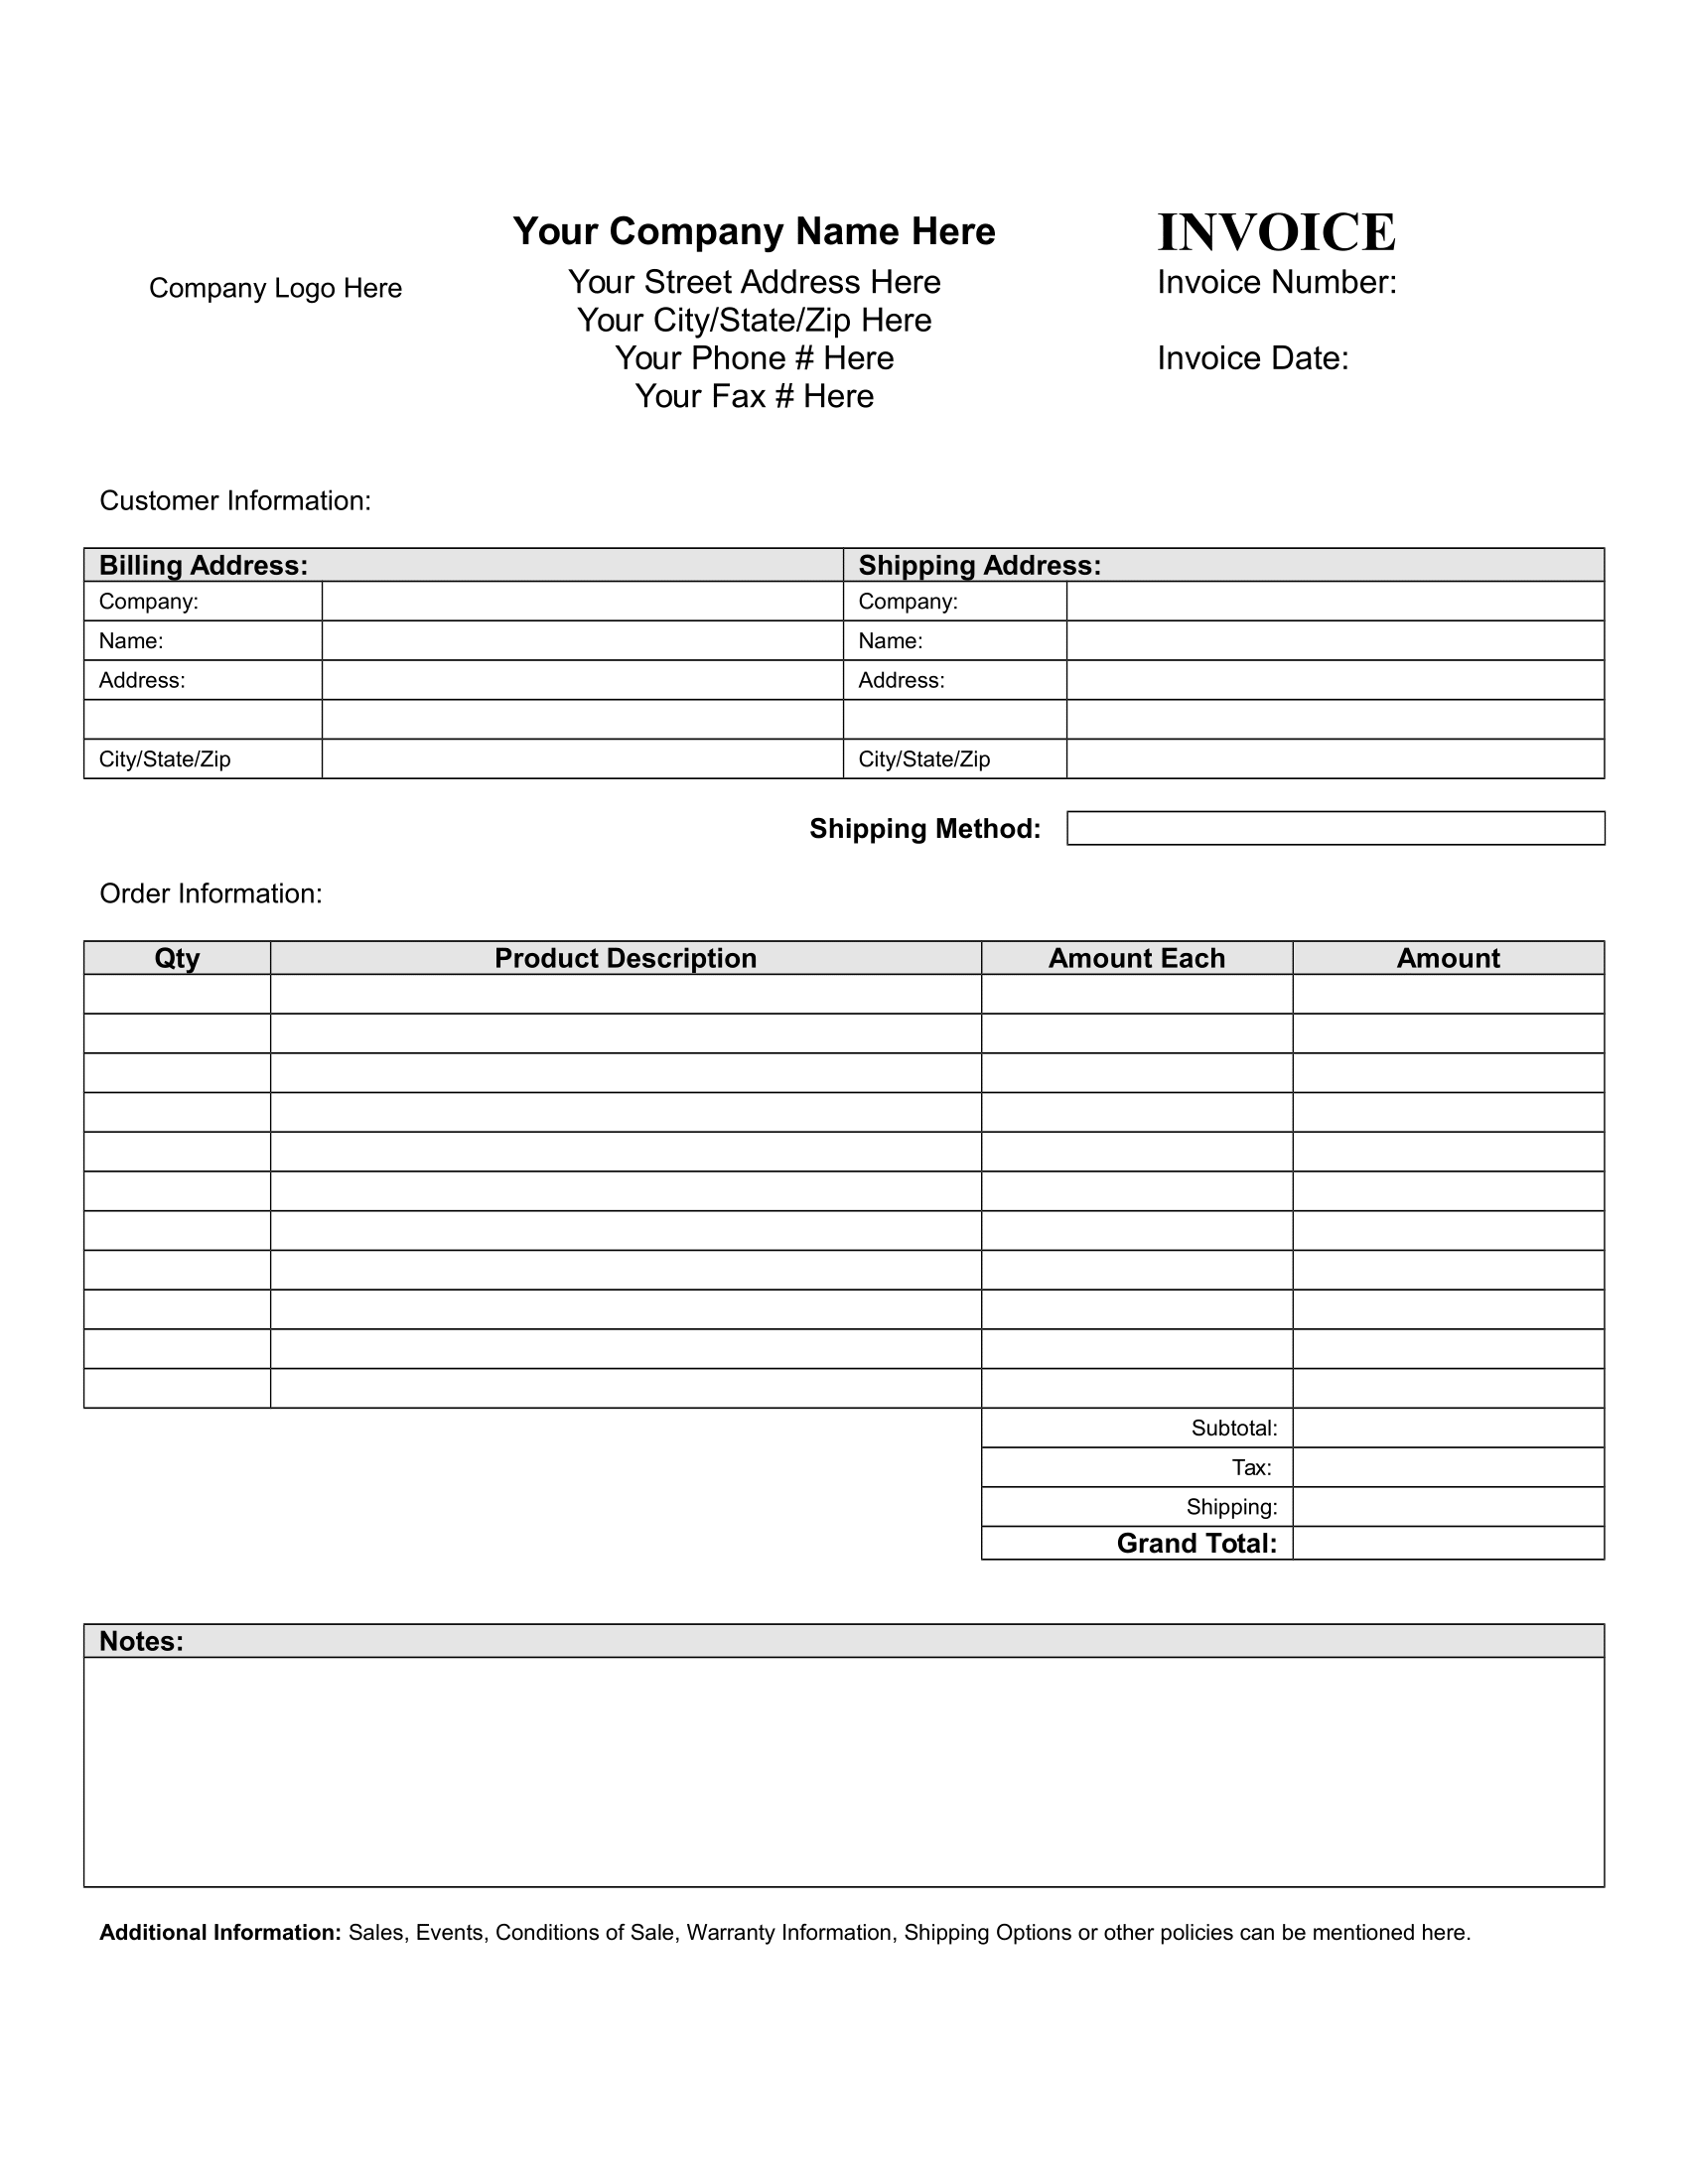 Forms - Download FREE Business Letter Templates, Forms ...